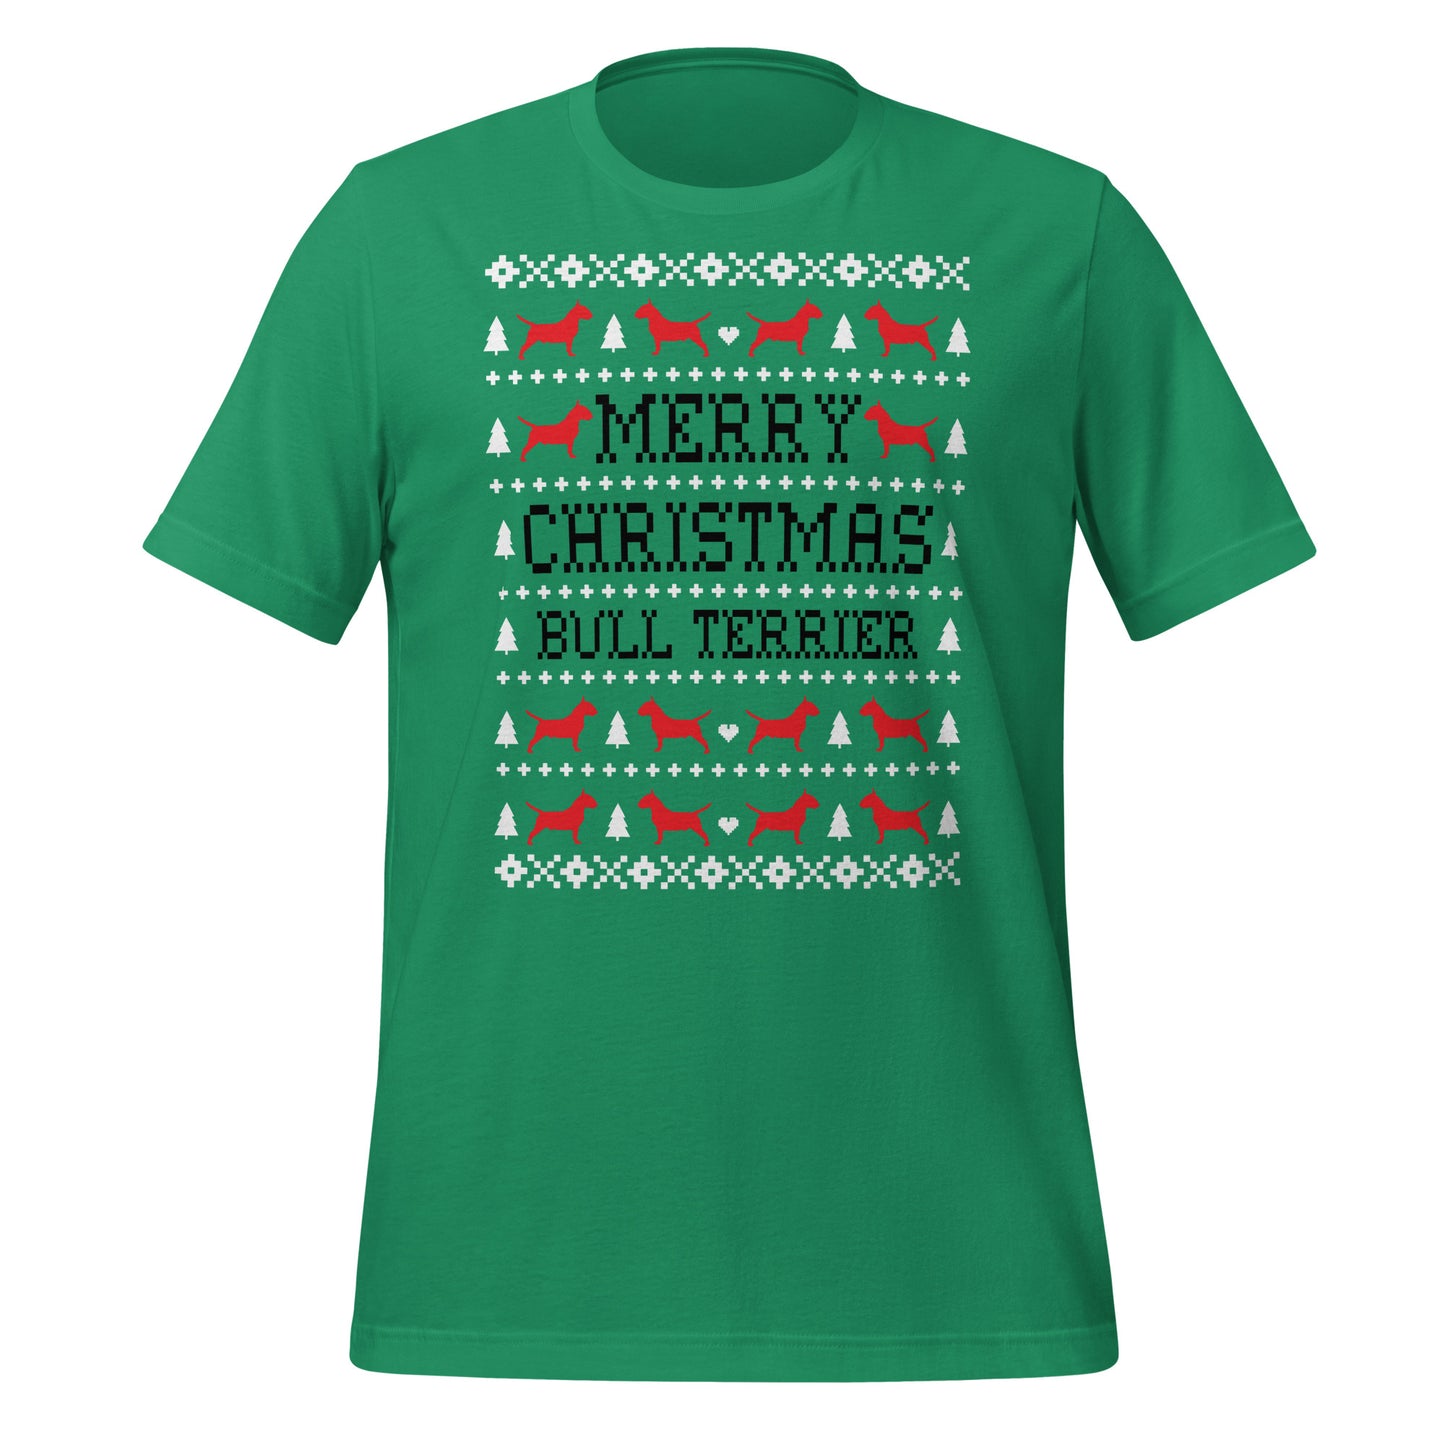 English Bull Terrier Ugly Christmas t-shirt green by Dog Artistry.